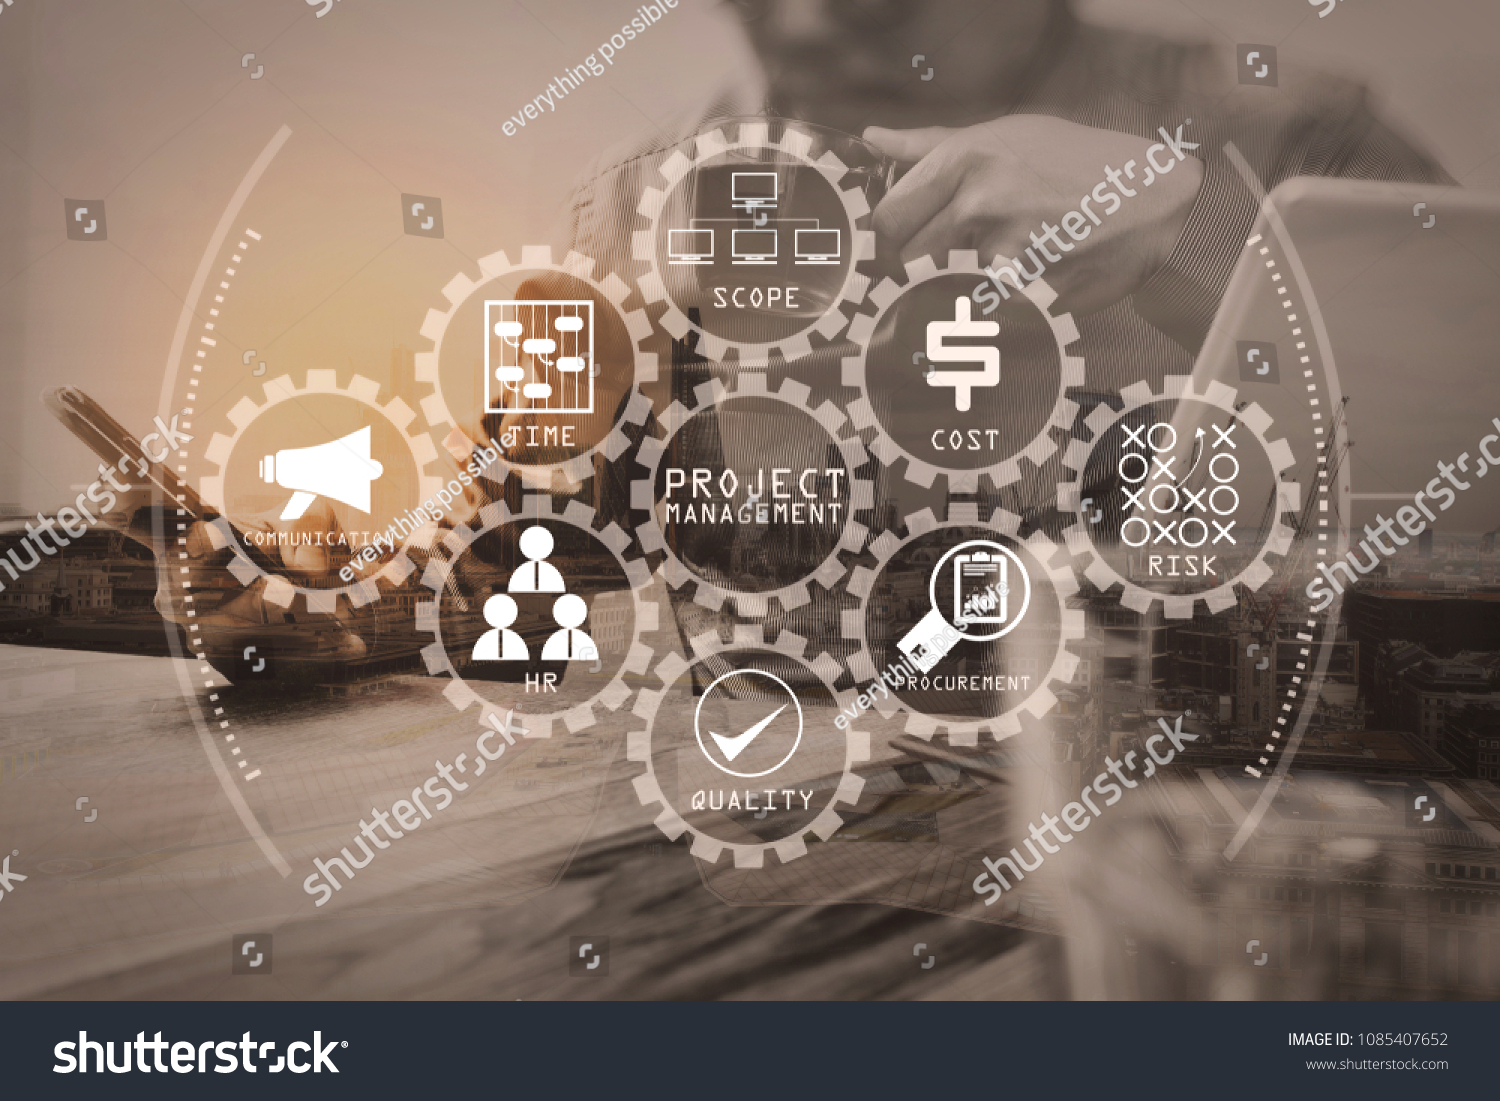 Project management diagram of cost, time, scope, human resources, risks, quality and communication with icons.Double exposure of success businessman using smart phone. #1085407652